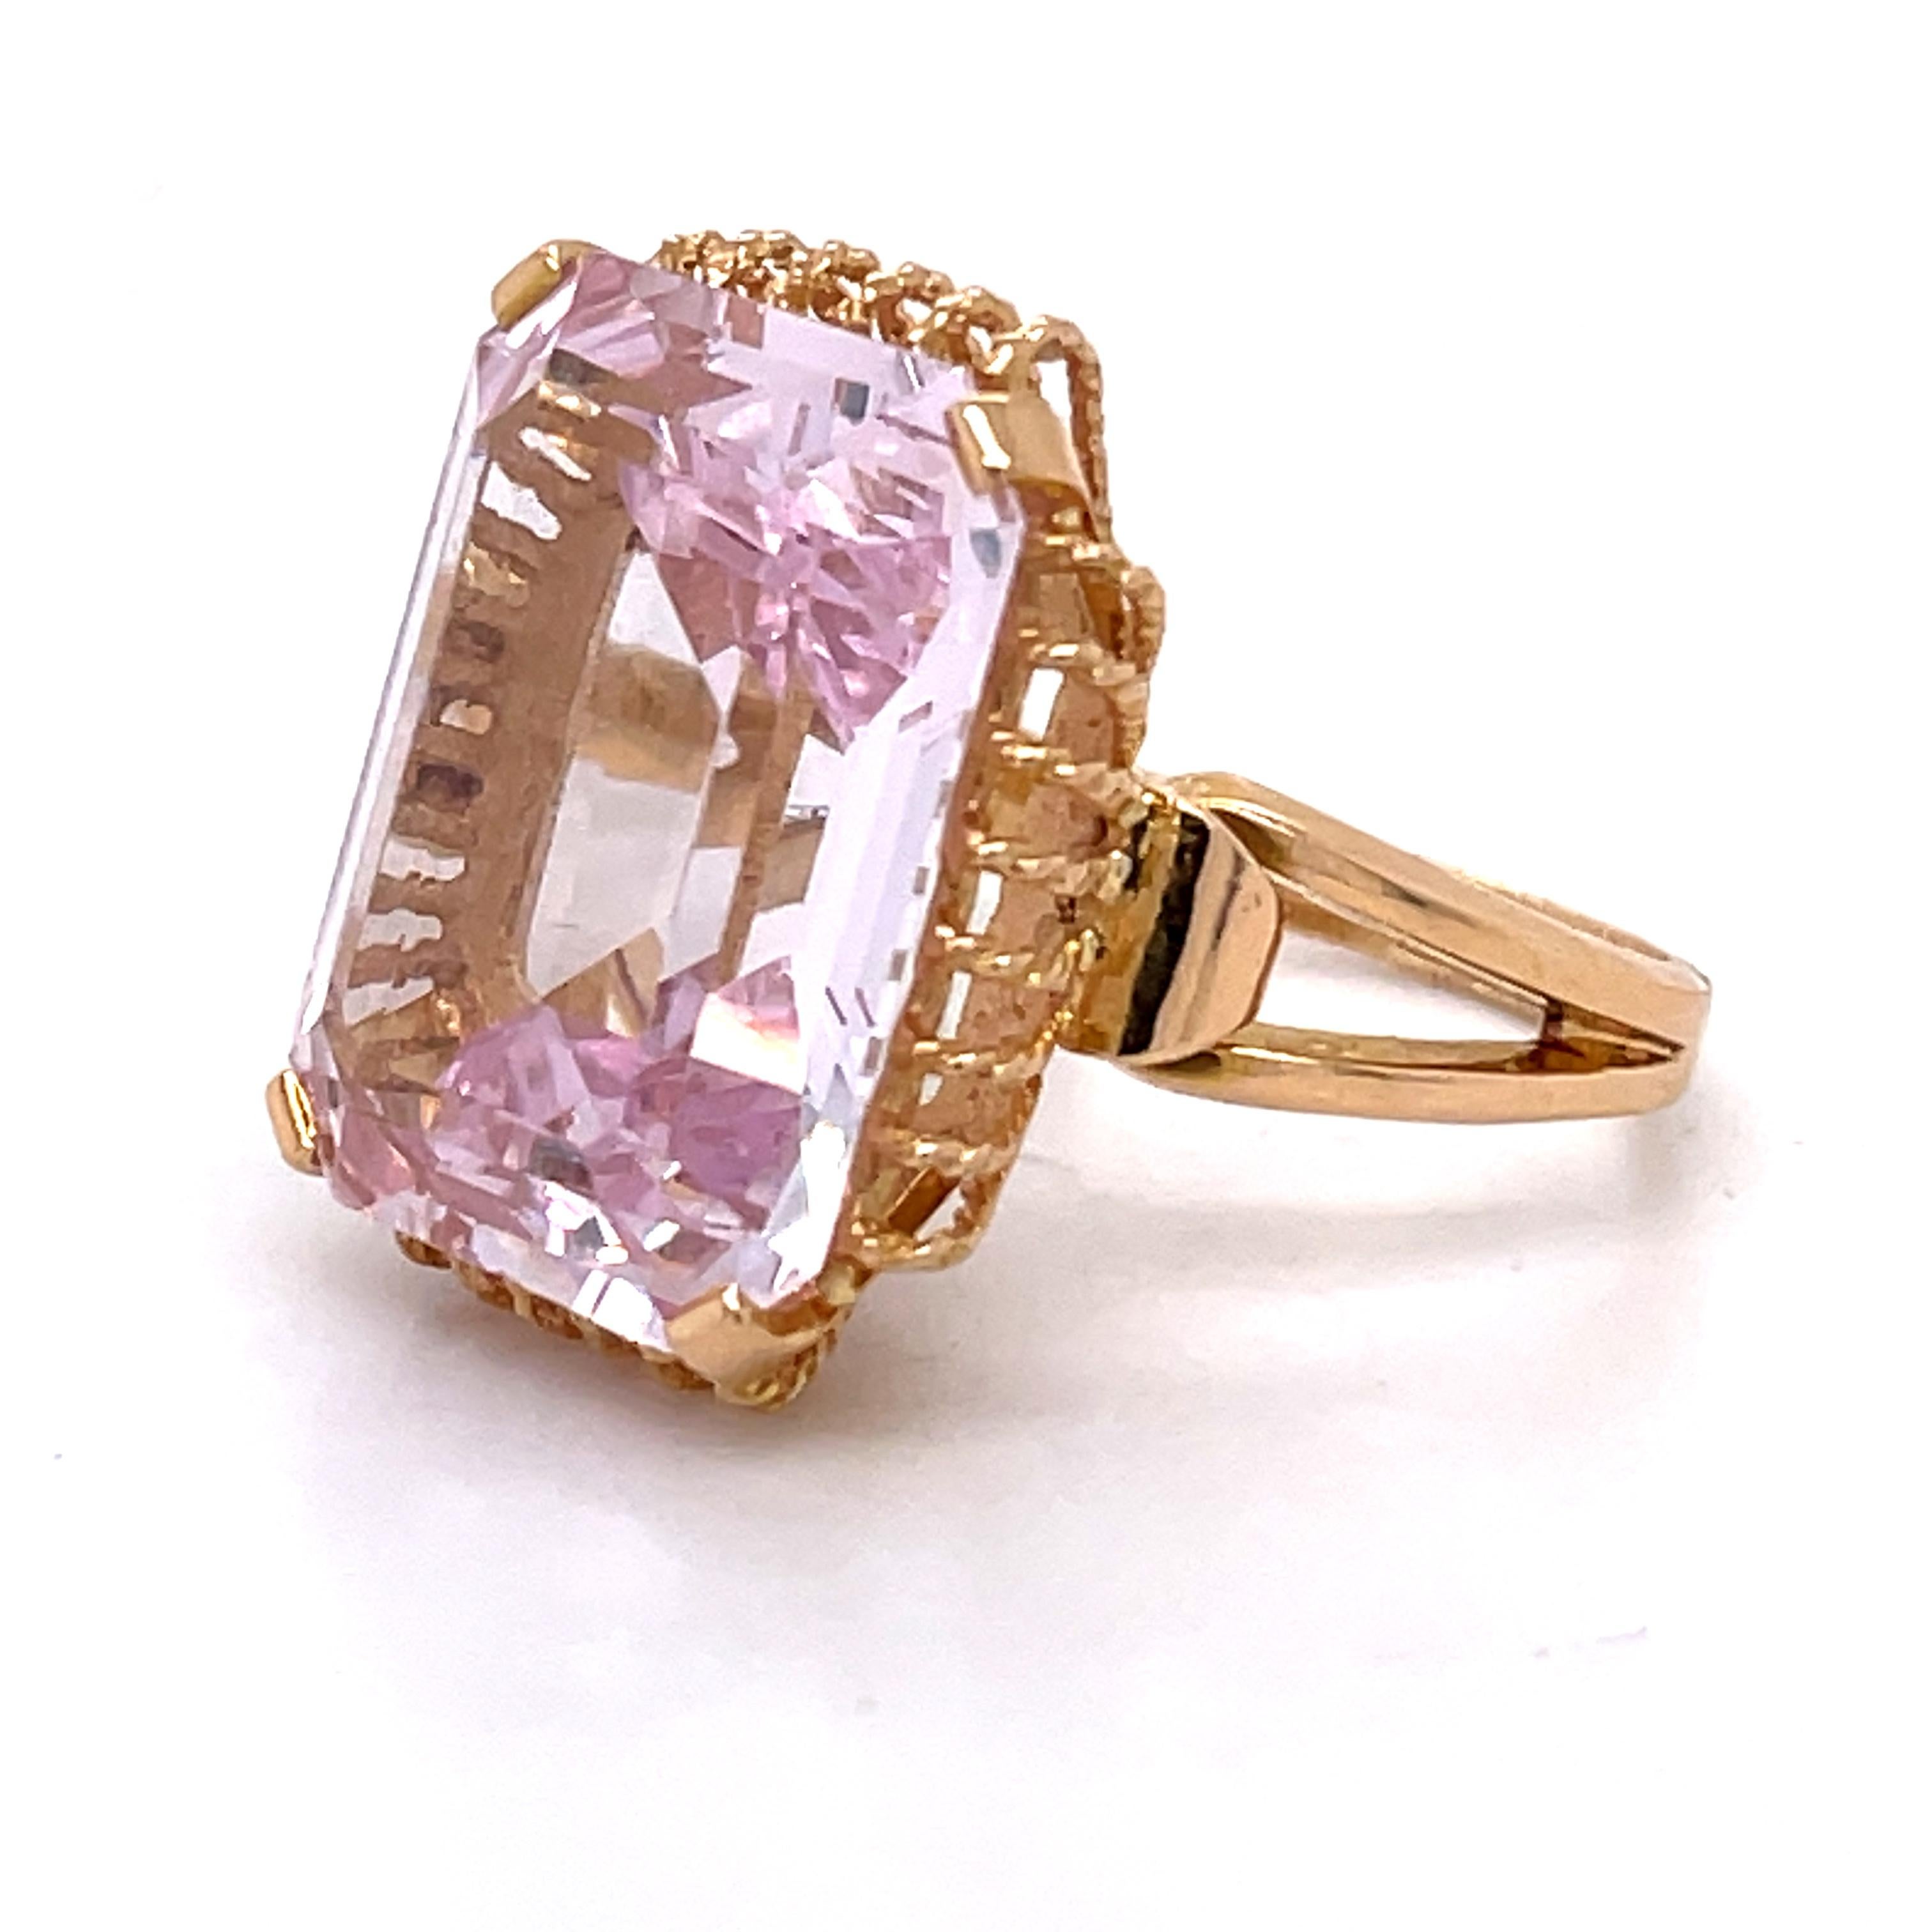 GWLAB Certified, 16.23ct Pink Spinel Emerald Cut, 14k Rose Gold, Cocktail Ring For Sale 5